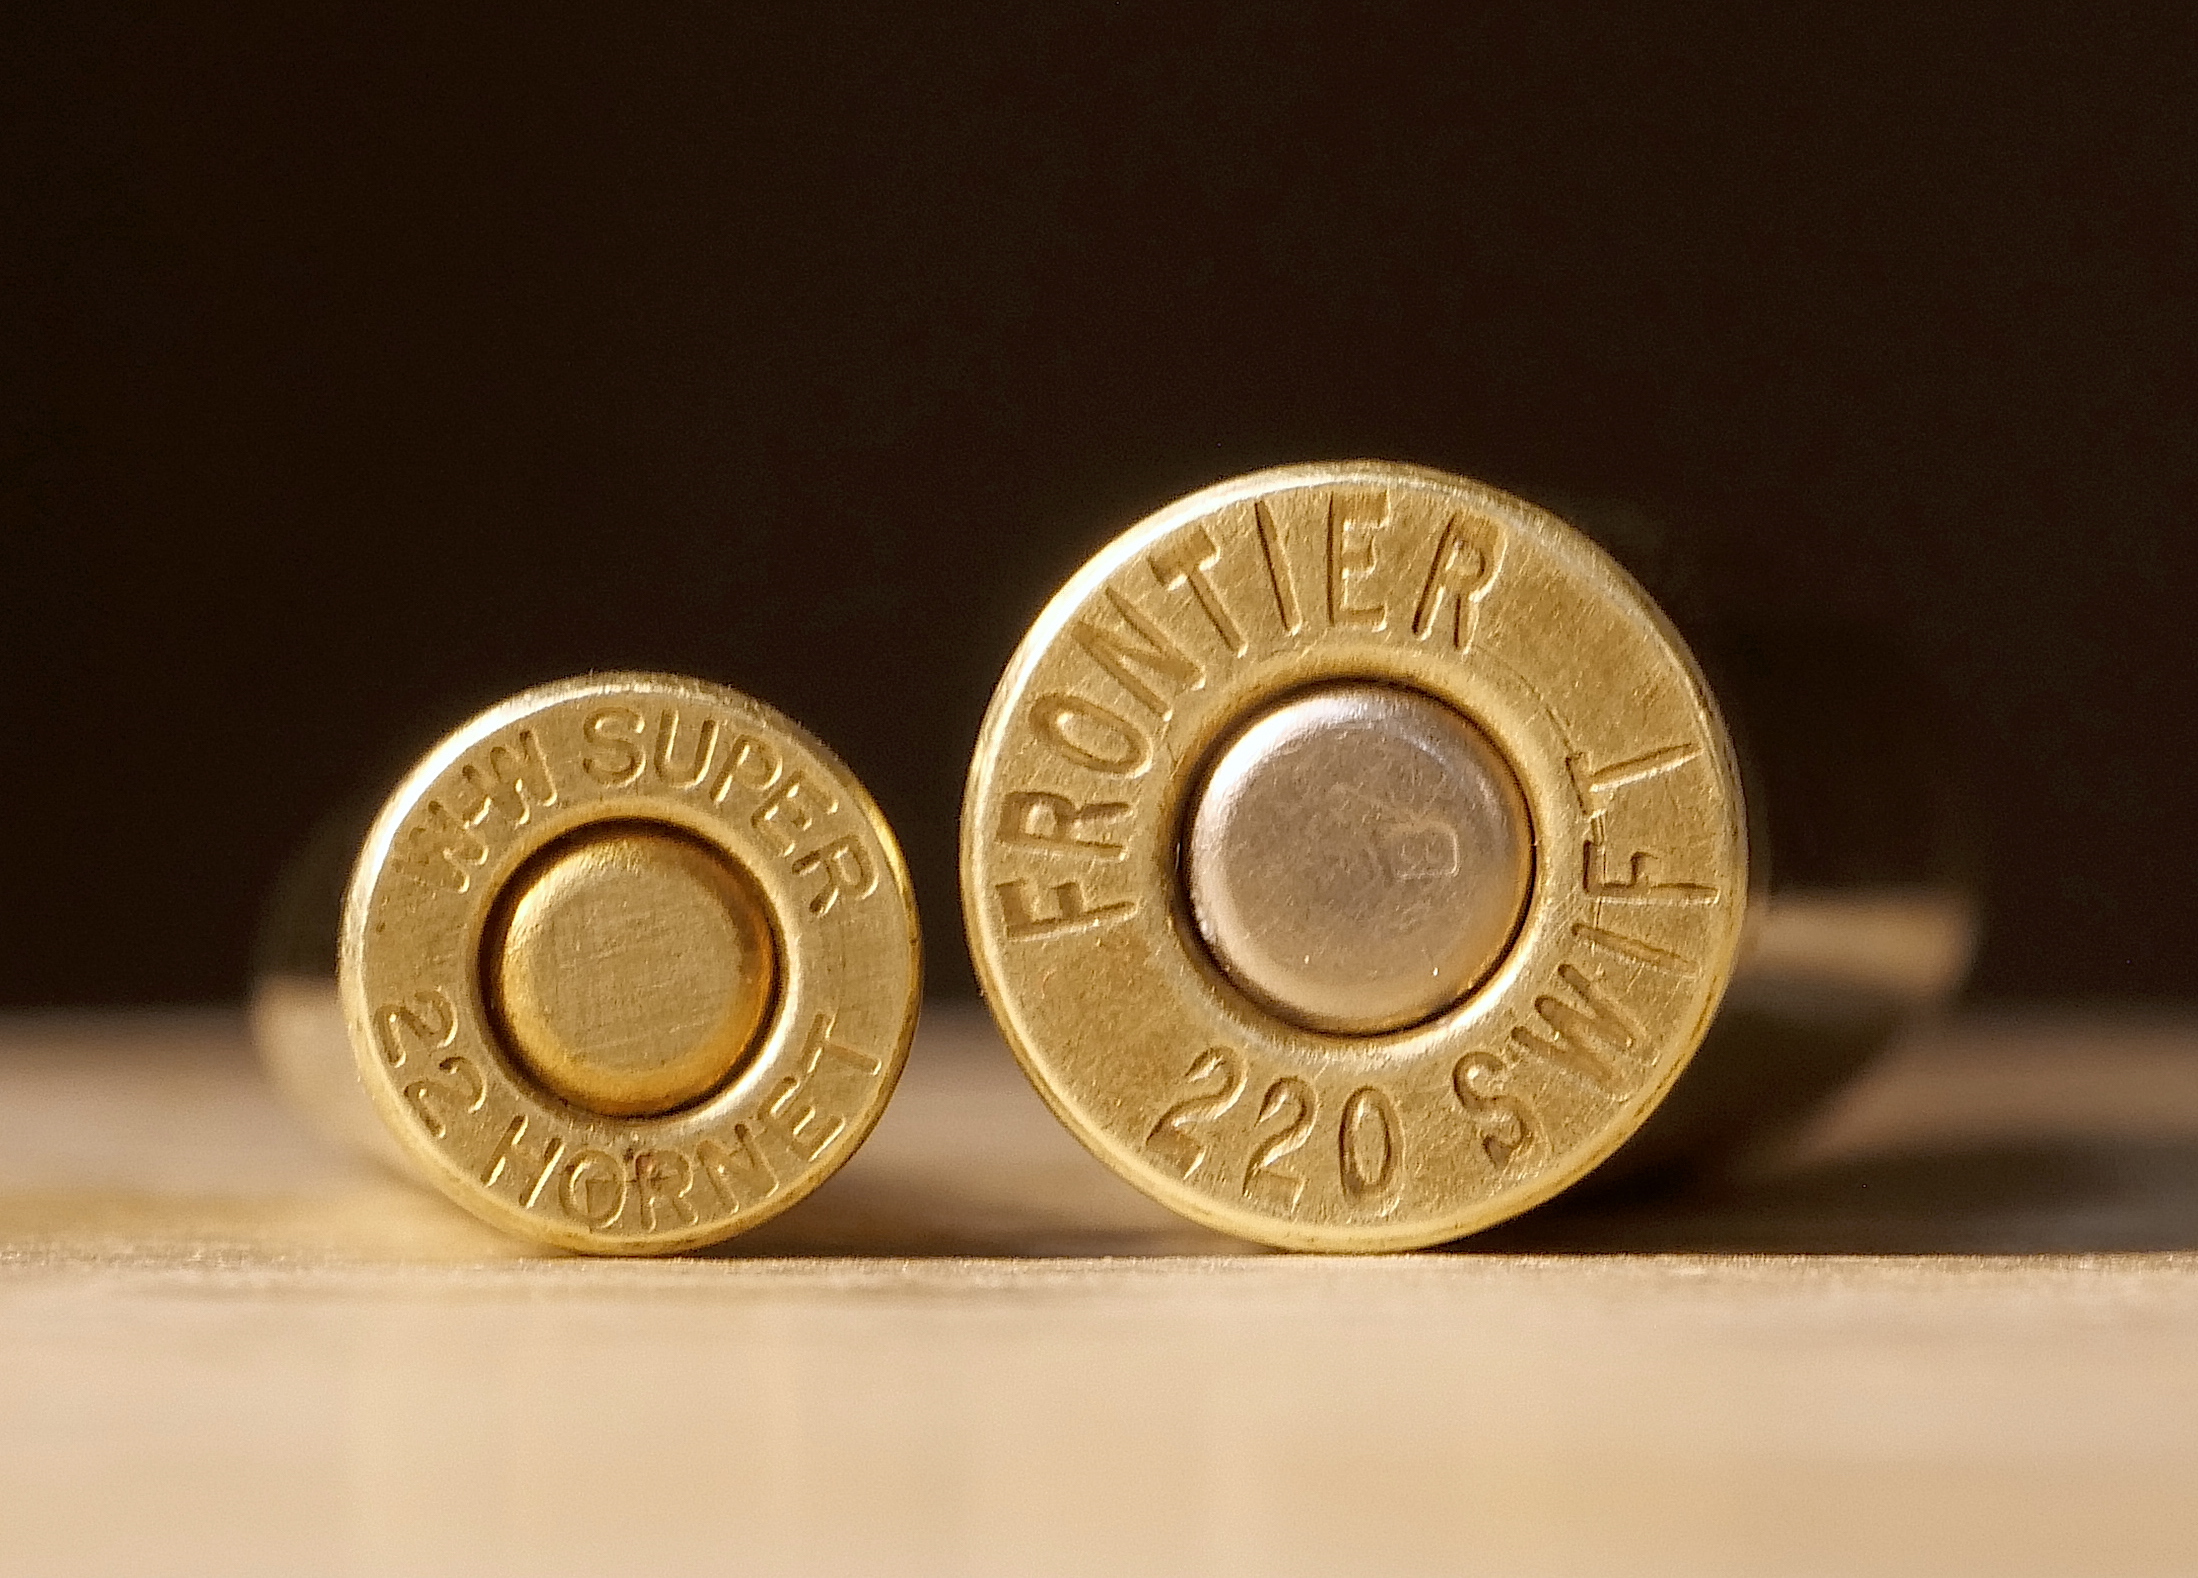 The .22 Hornet wasn't even close to the .220 Swift when it came to muzzle velocity.